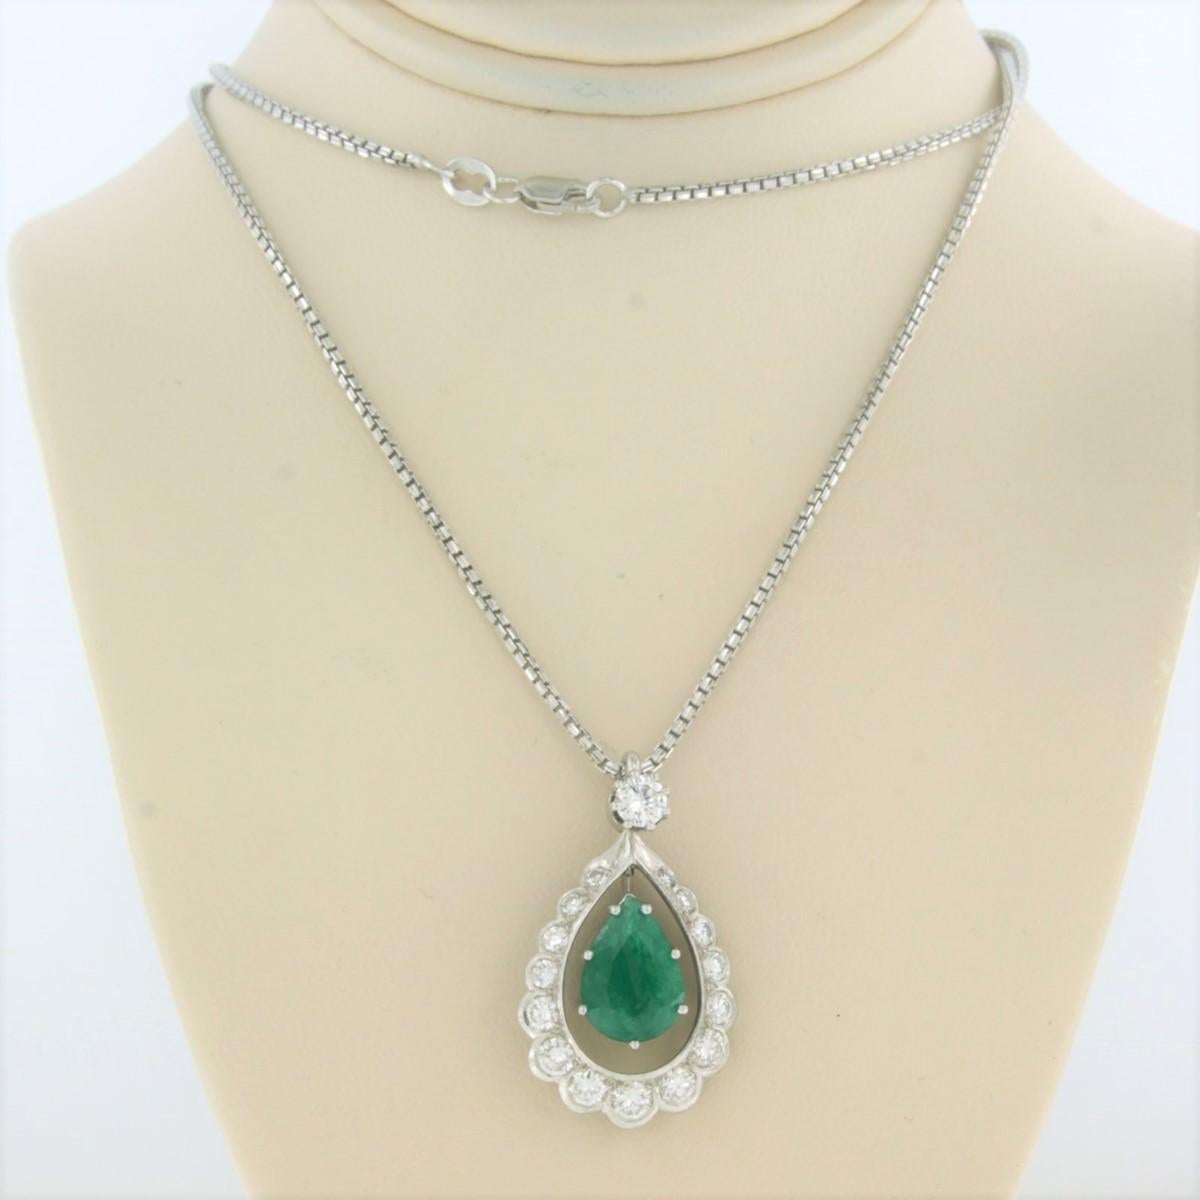 18k white gold necklace with drop-shaped pendant set with emerald. 1.80ct and brilliant cut diamond up to. 0.60ct - F/G - VS/SI - 50 cm long

detailed description:

the necklace is 50 cm long and 1.3 mm wide

the pendant is 2.8 cm long by 1.7 cm